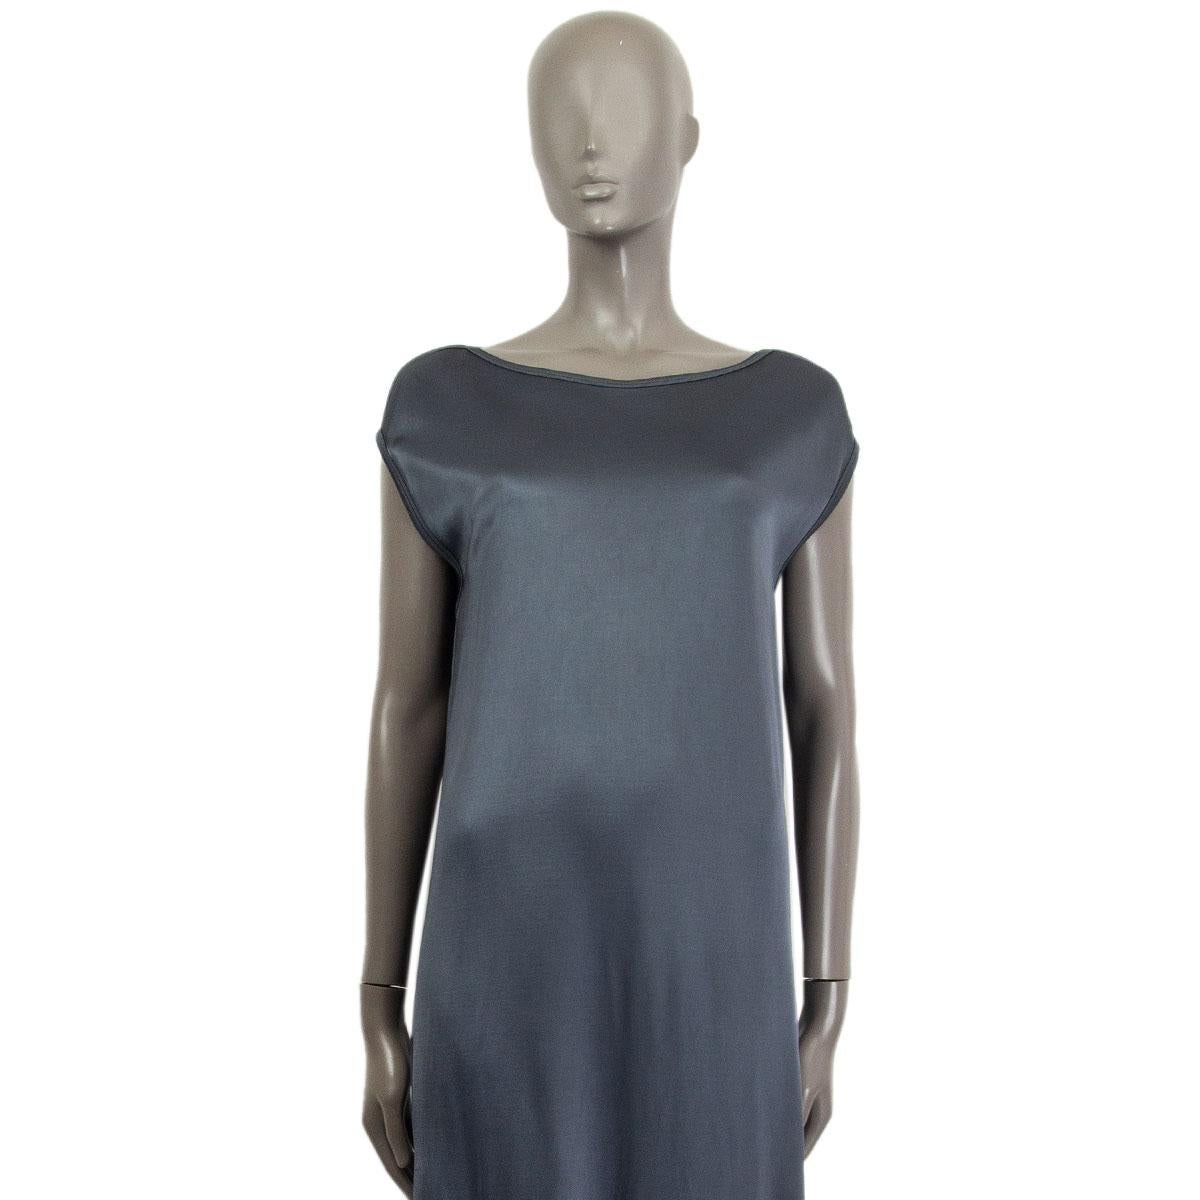 100% authentic Jil Sander sleeveless shift long dress in pigeon blue viscose (83%) and elastane (17%) with bateau neck-line and slit pockets on the side. Unlined. Has been worn and is in excellent condition.

Measurements
Tag Size	Missing Tag